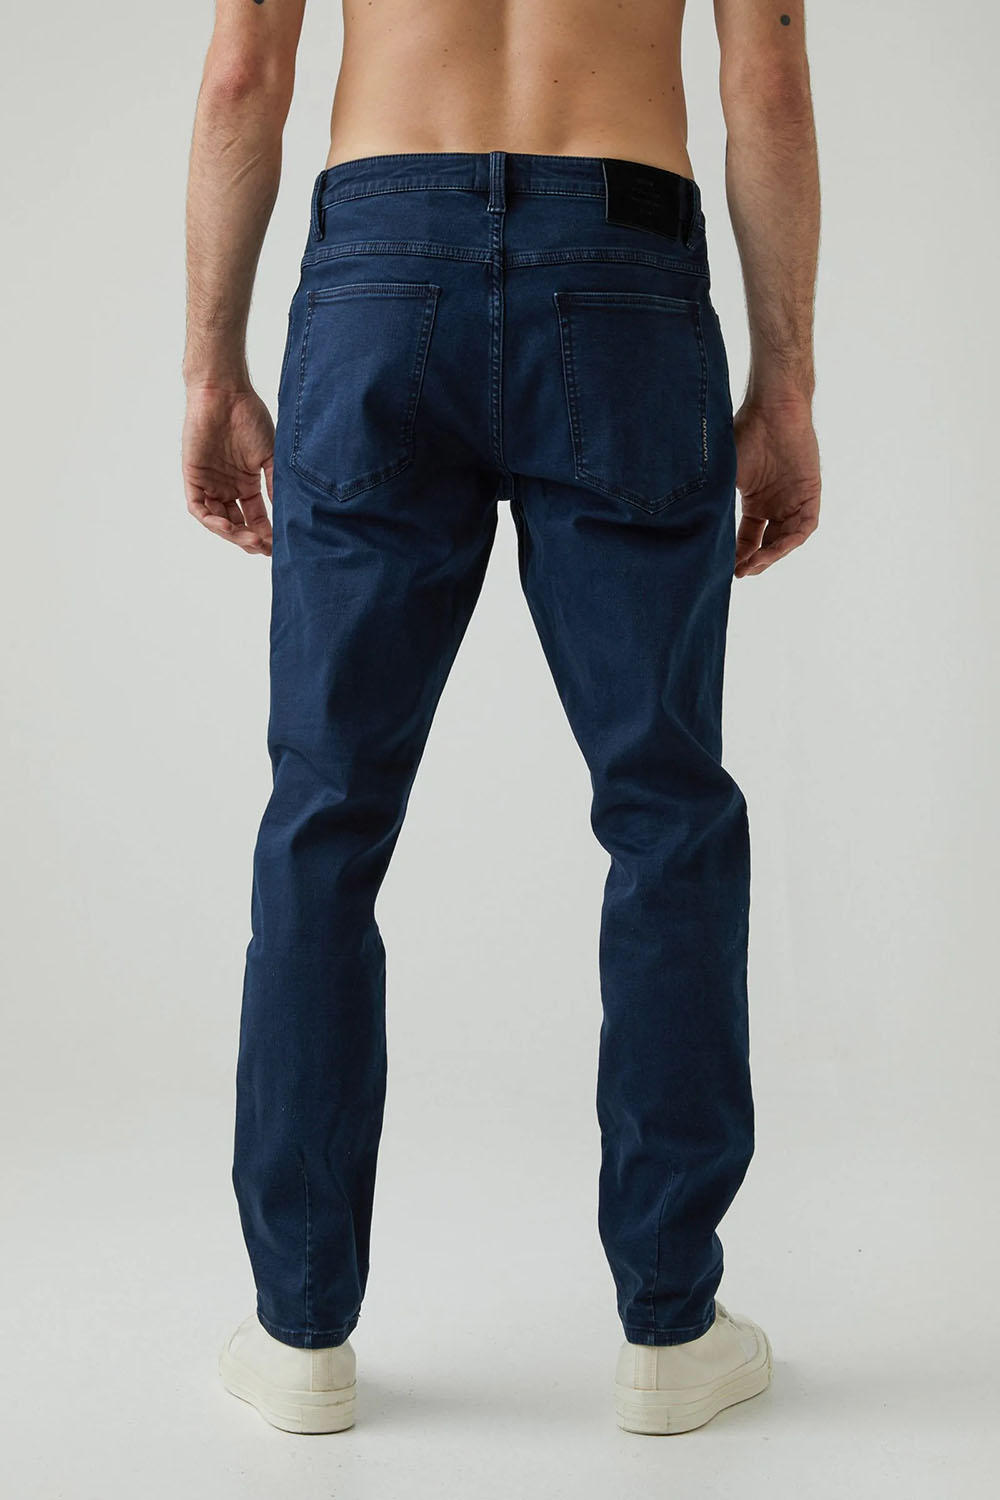 NEUW - Ray Tapered - Nordic Blue - Back